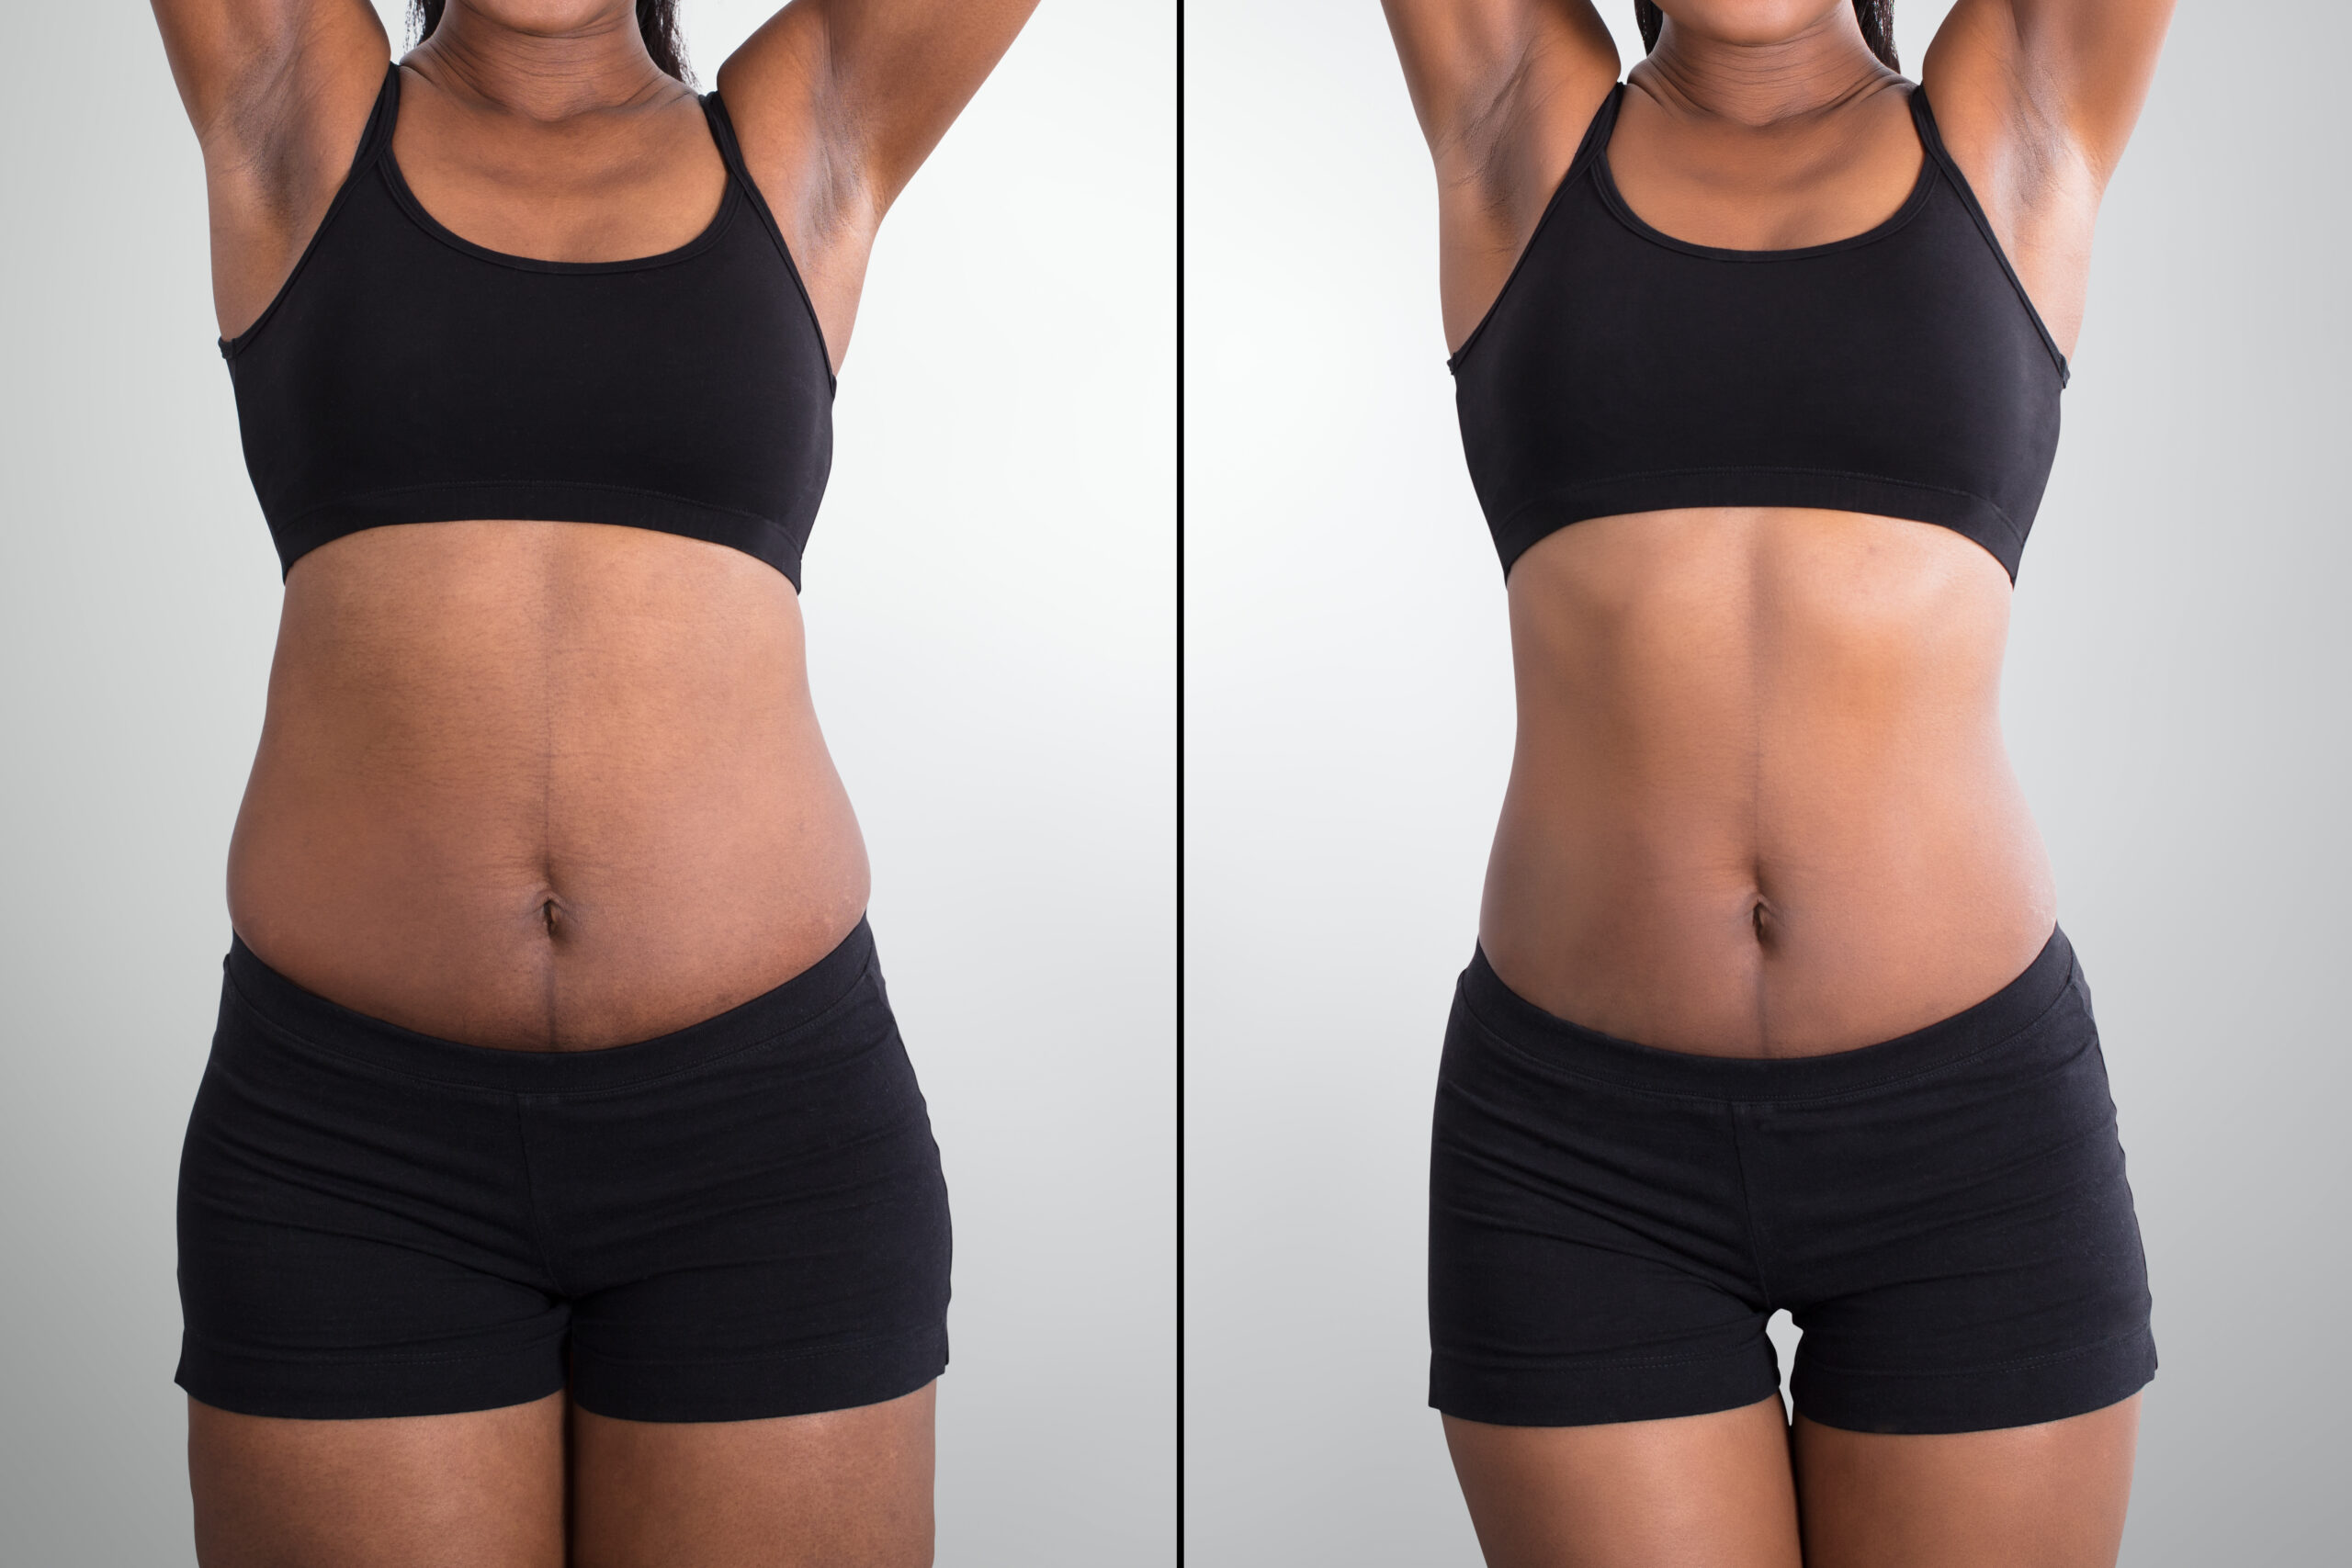 Non Surgical Liposuction In Chandigarh